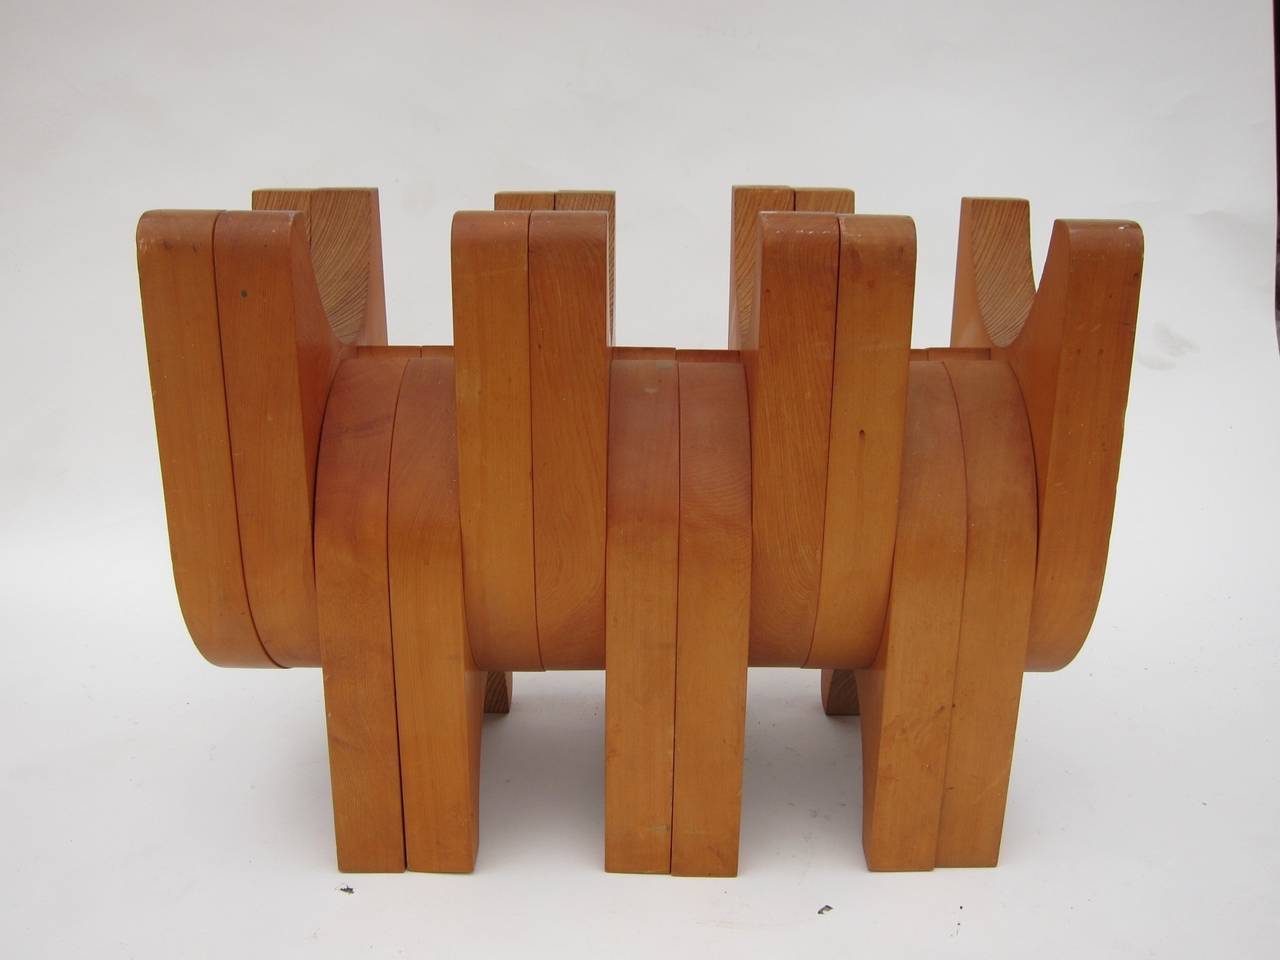 Adjustable wood sculpture by Jean Yates. Jean Yates was a Santa Rosa California. Based artist in the 1960s. Comes with adjustable tool.